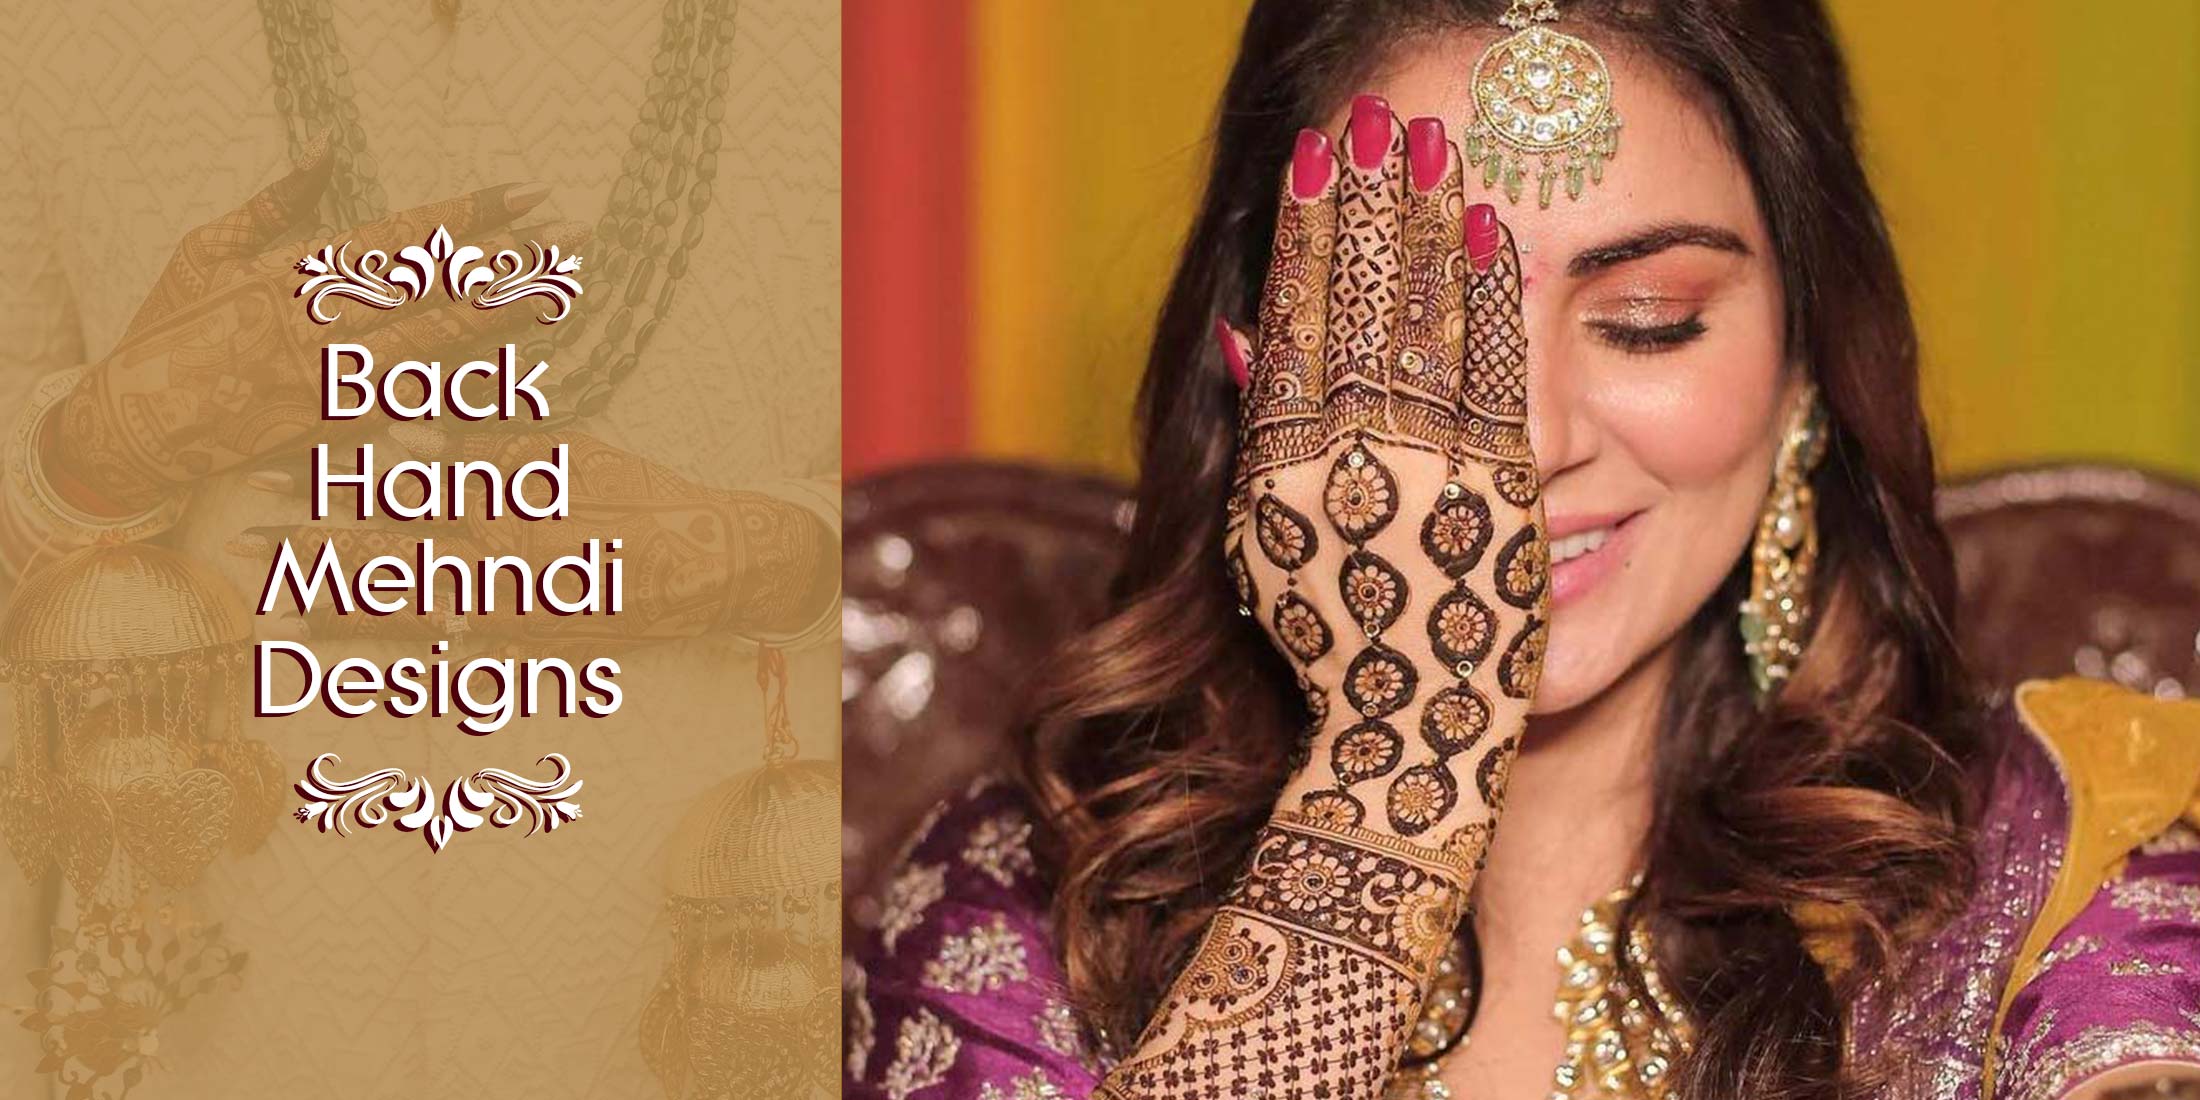 30+ Stunning Back Hand Mehndi Designs for Wedding and Other Occasions